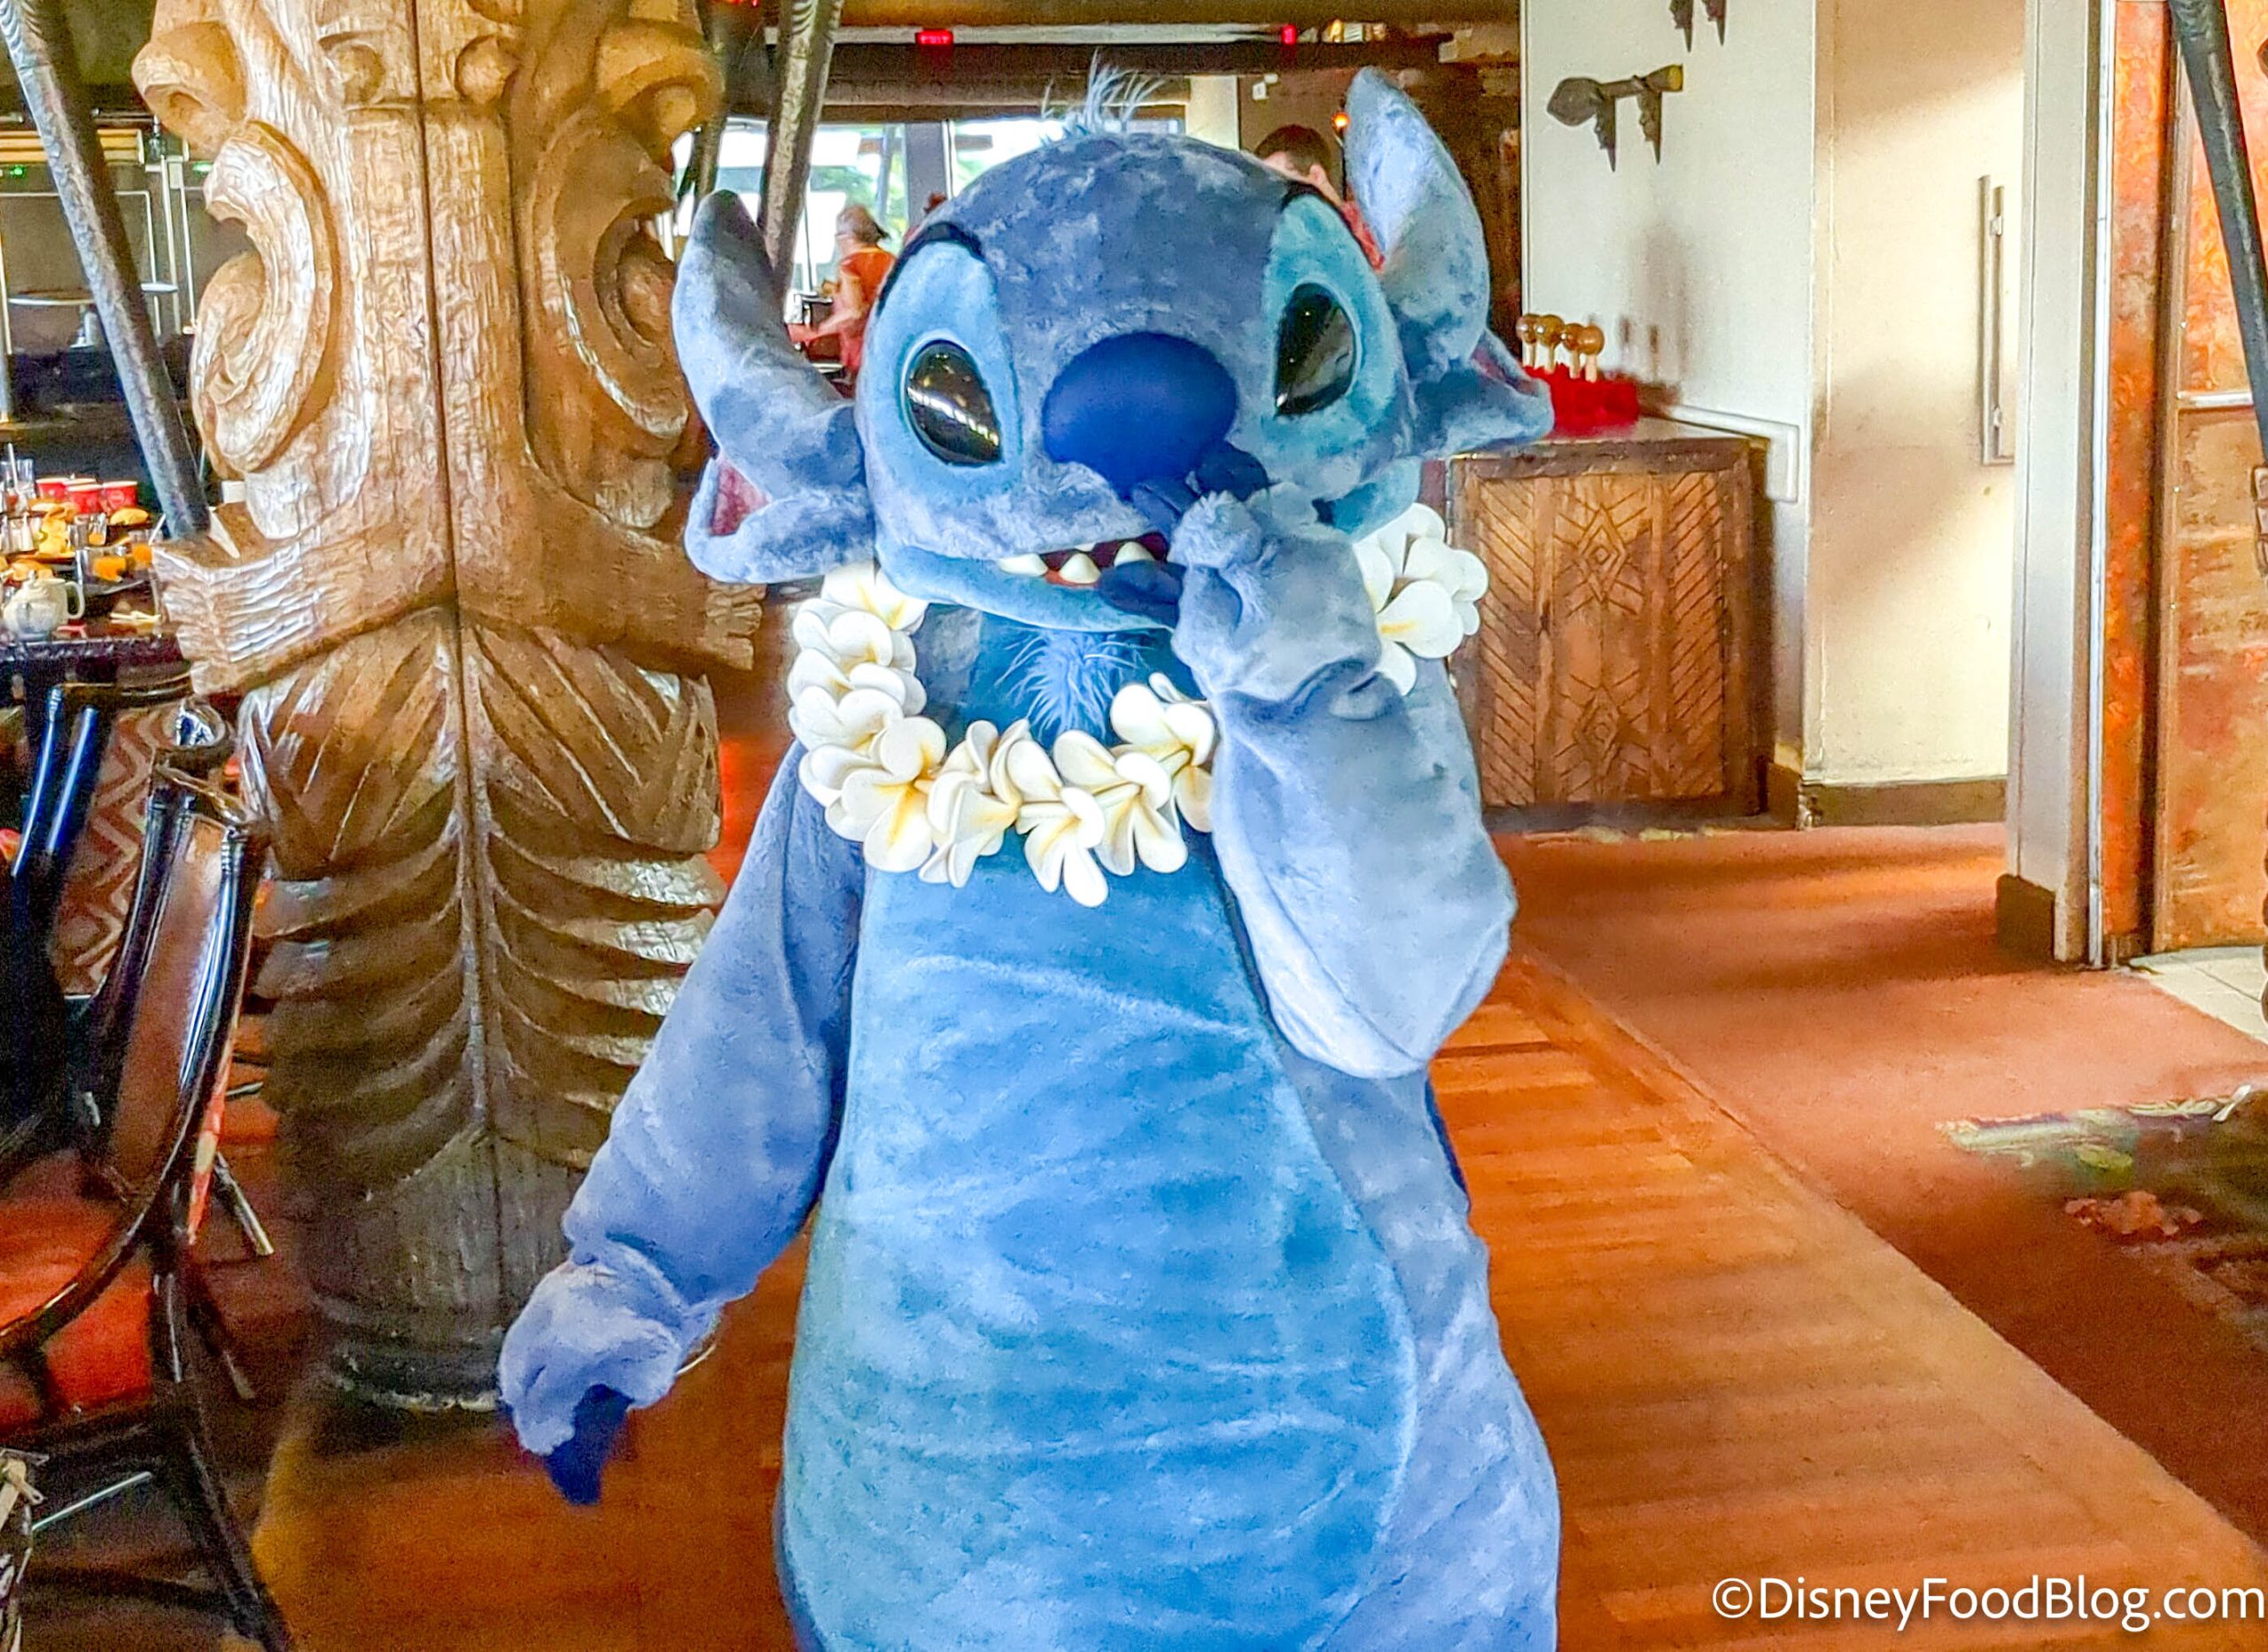 Disney's Stitch-Inspired Clothes and Accessories